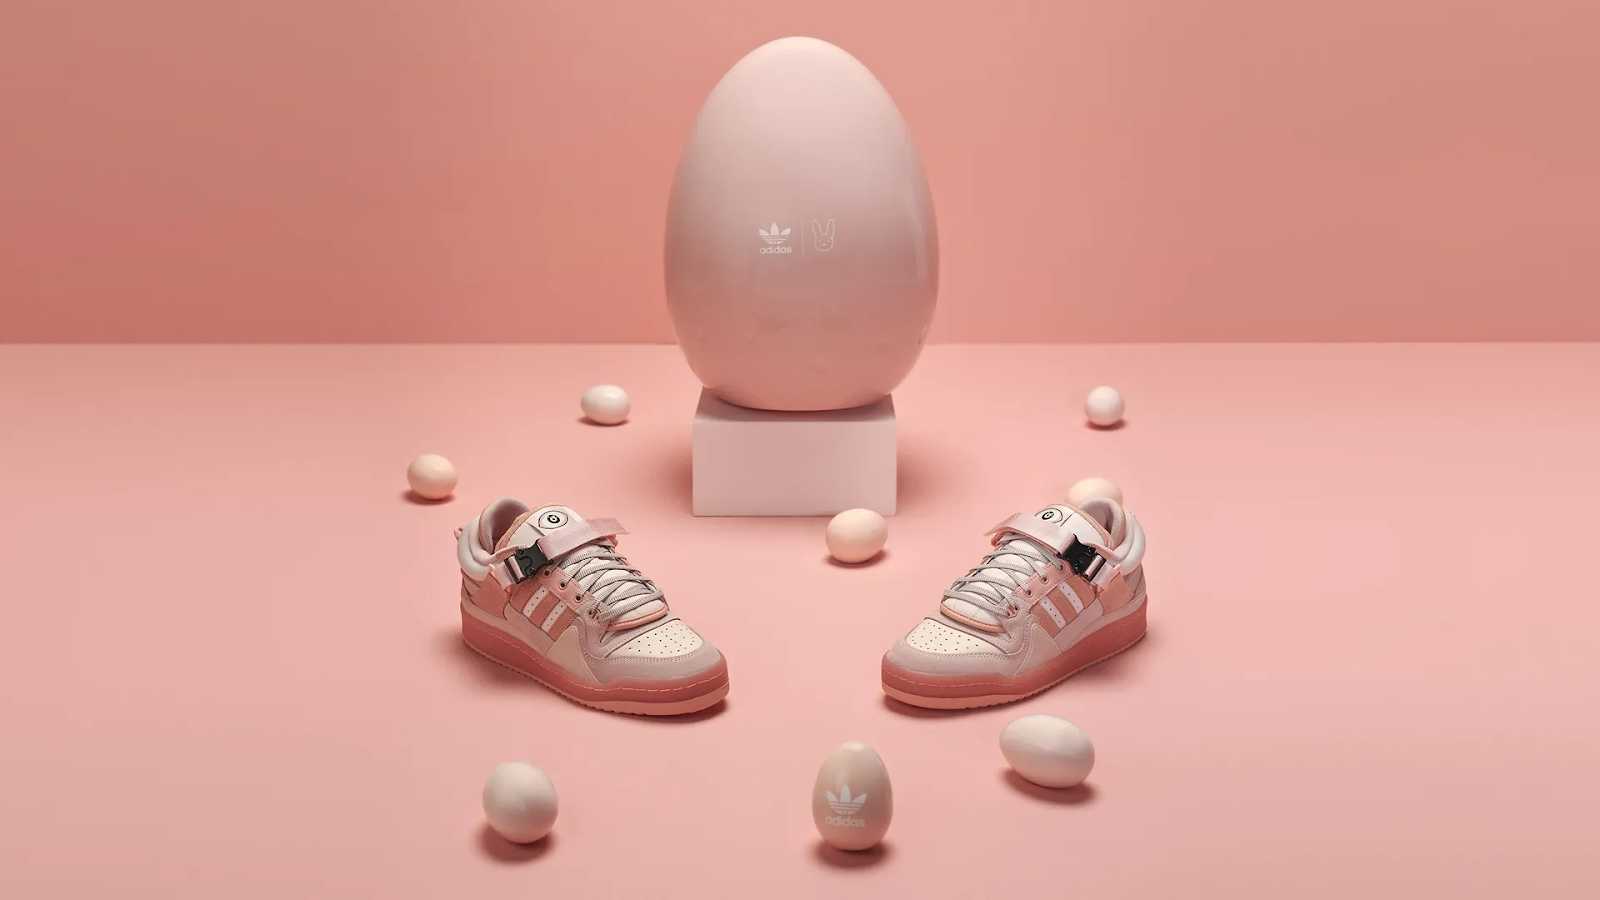 Adidas and Bad Bunny Easter Egg Ad. Image Source: Adidas licensed under CC BY 2.0